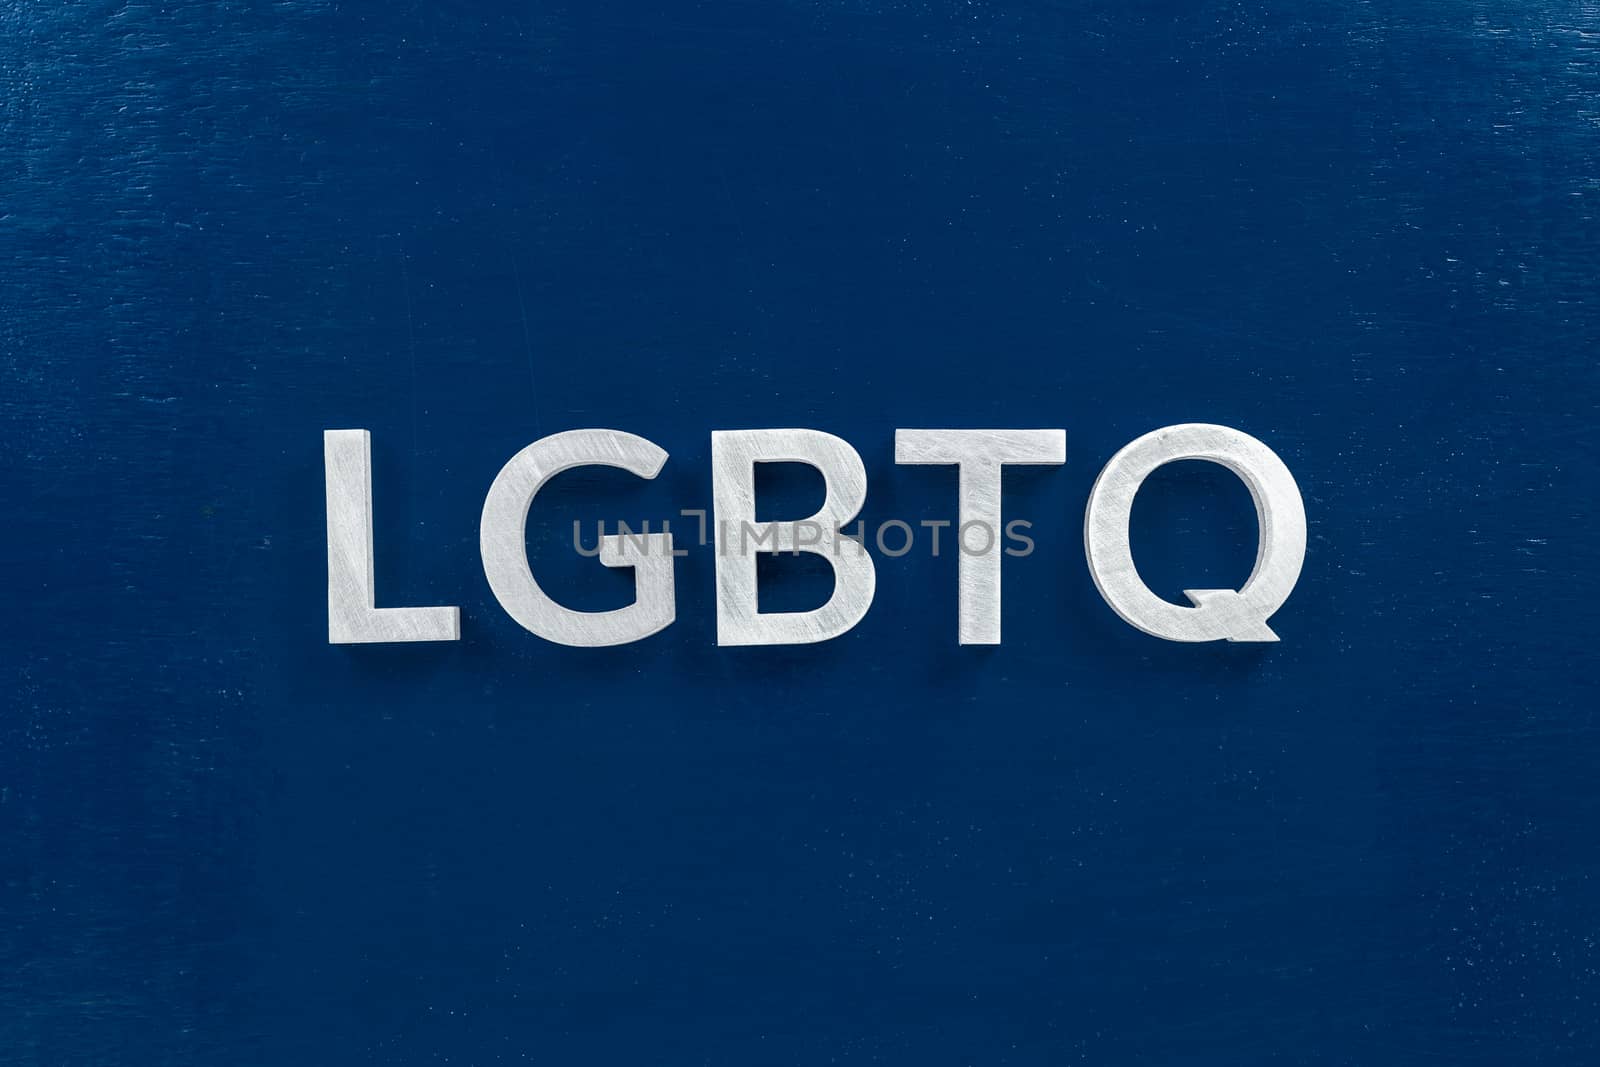 the abbreviation lgbtq - lesbian, gay, bisexual, transgendered, and queer laid with white letters on dark blue flat background by z1b